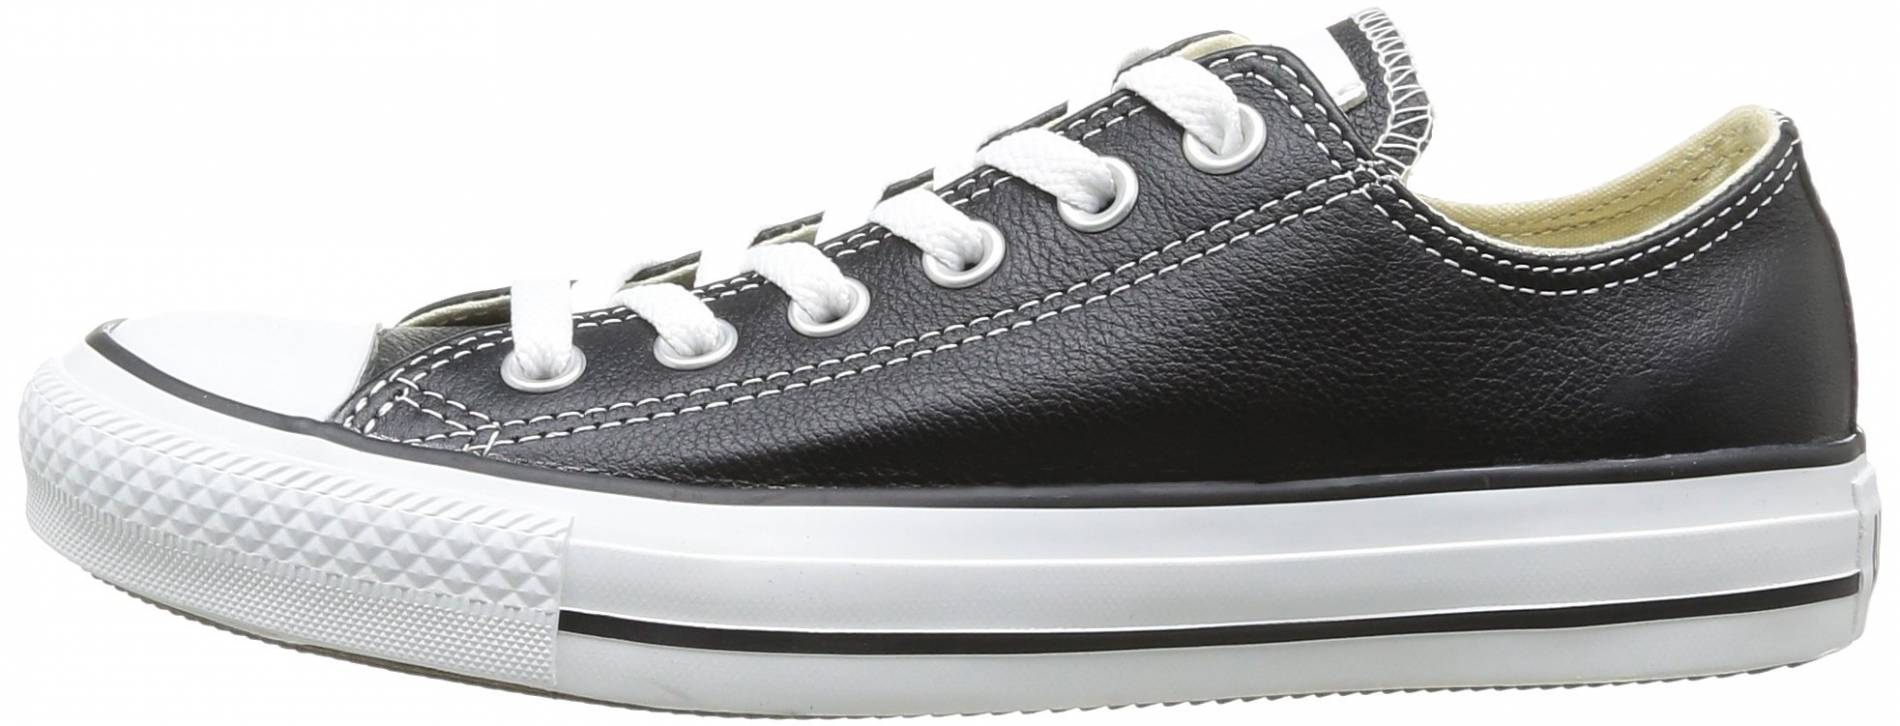 converse leather basketball shoes